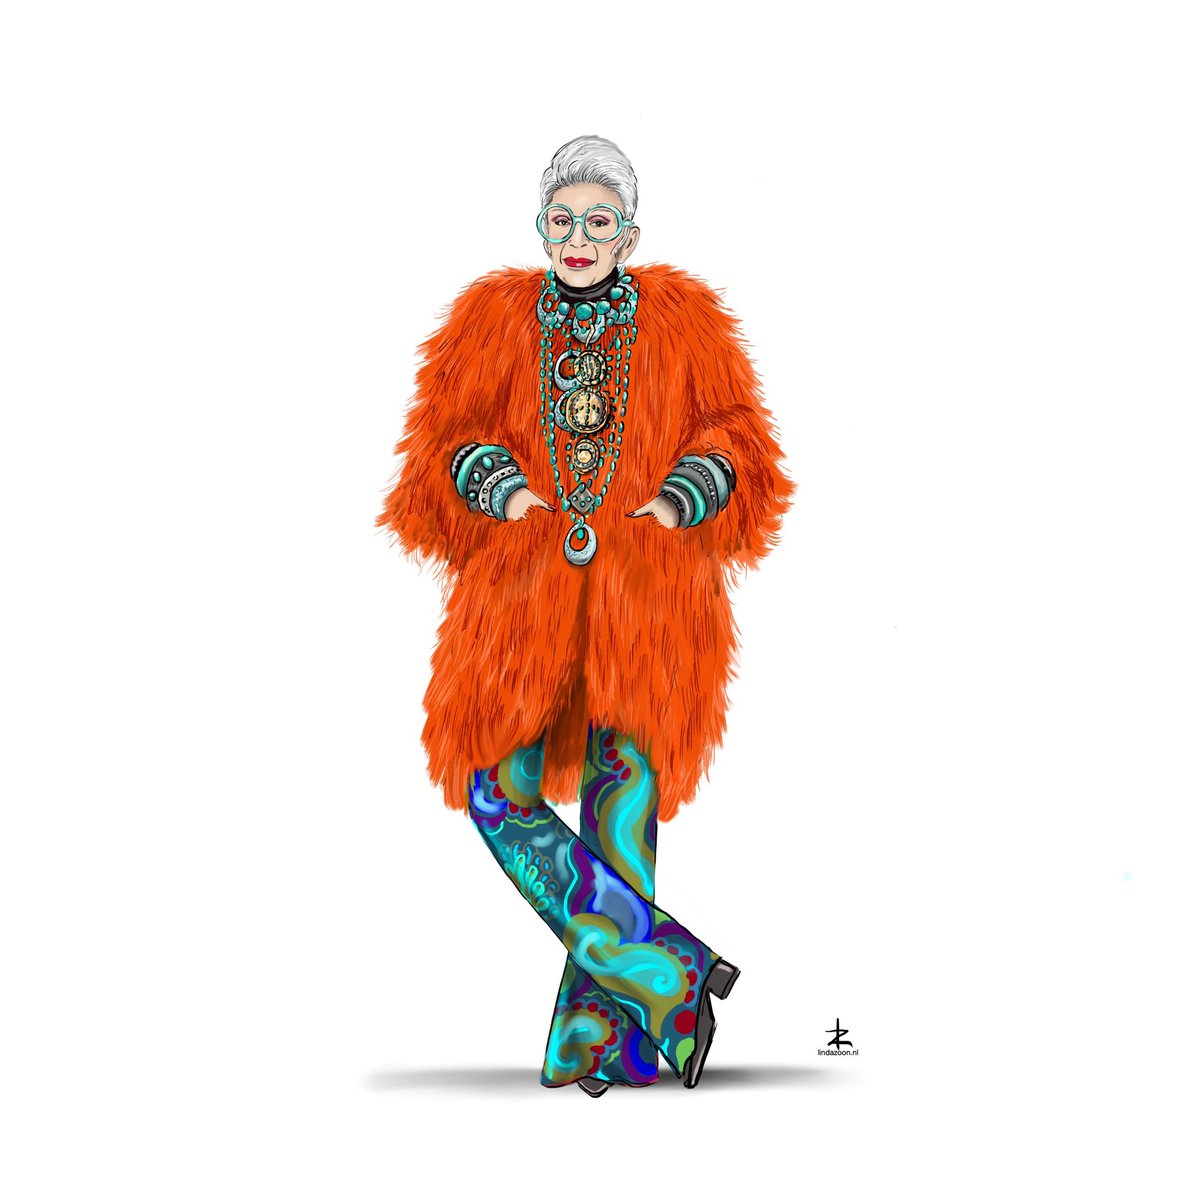 R I P 🦋 Iris Apfel: ‘It’s better to be happy than to be well-dressed.’ Thank you for your inspiration!

#voguefashion #harpersbazaar  #irisapfelstyle #irisapfelinspired #fashioninspiration #irisforever 
#styleicon #powerwoman 
Sketch #lindazoon